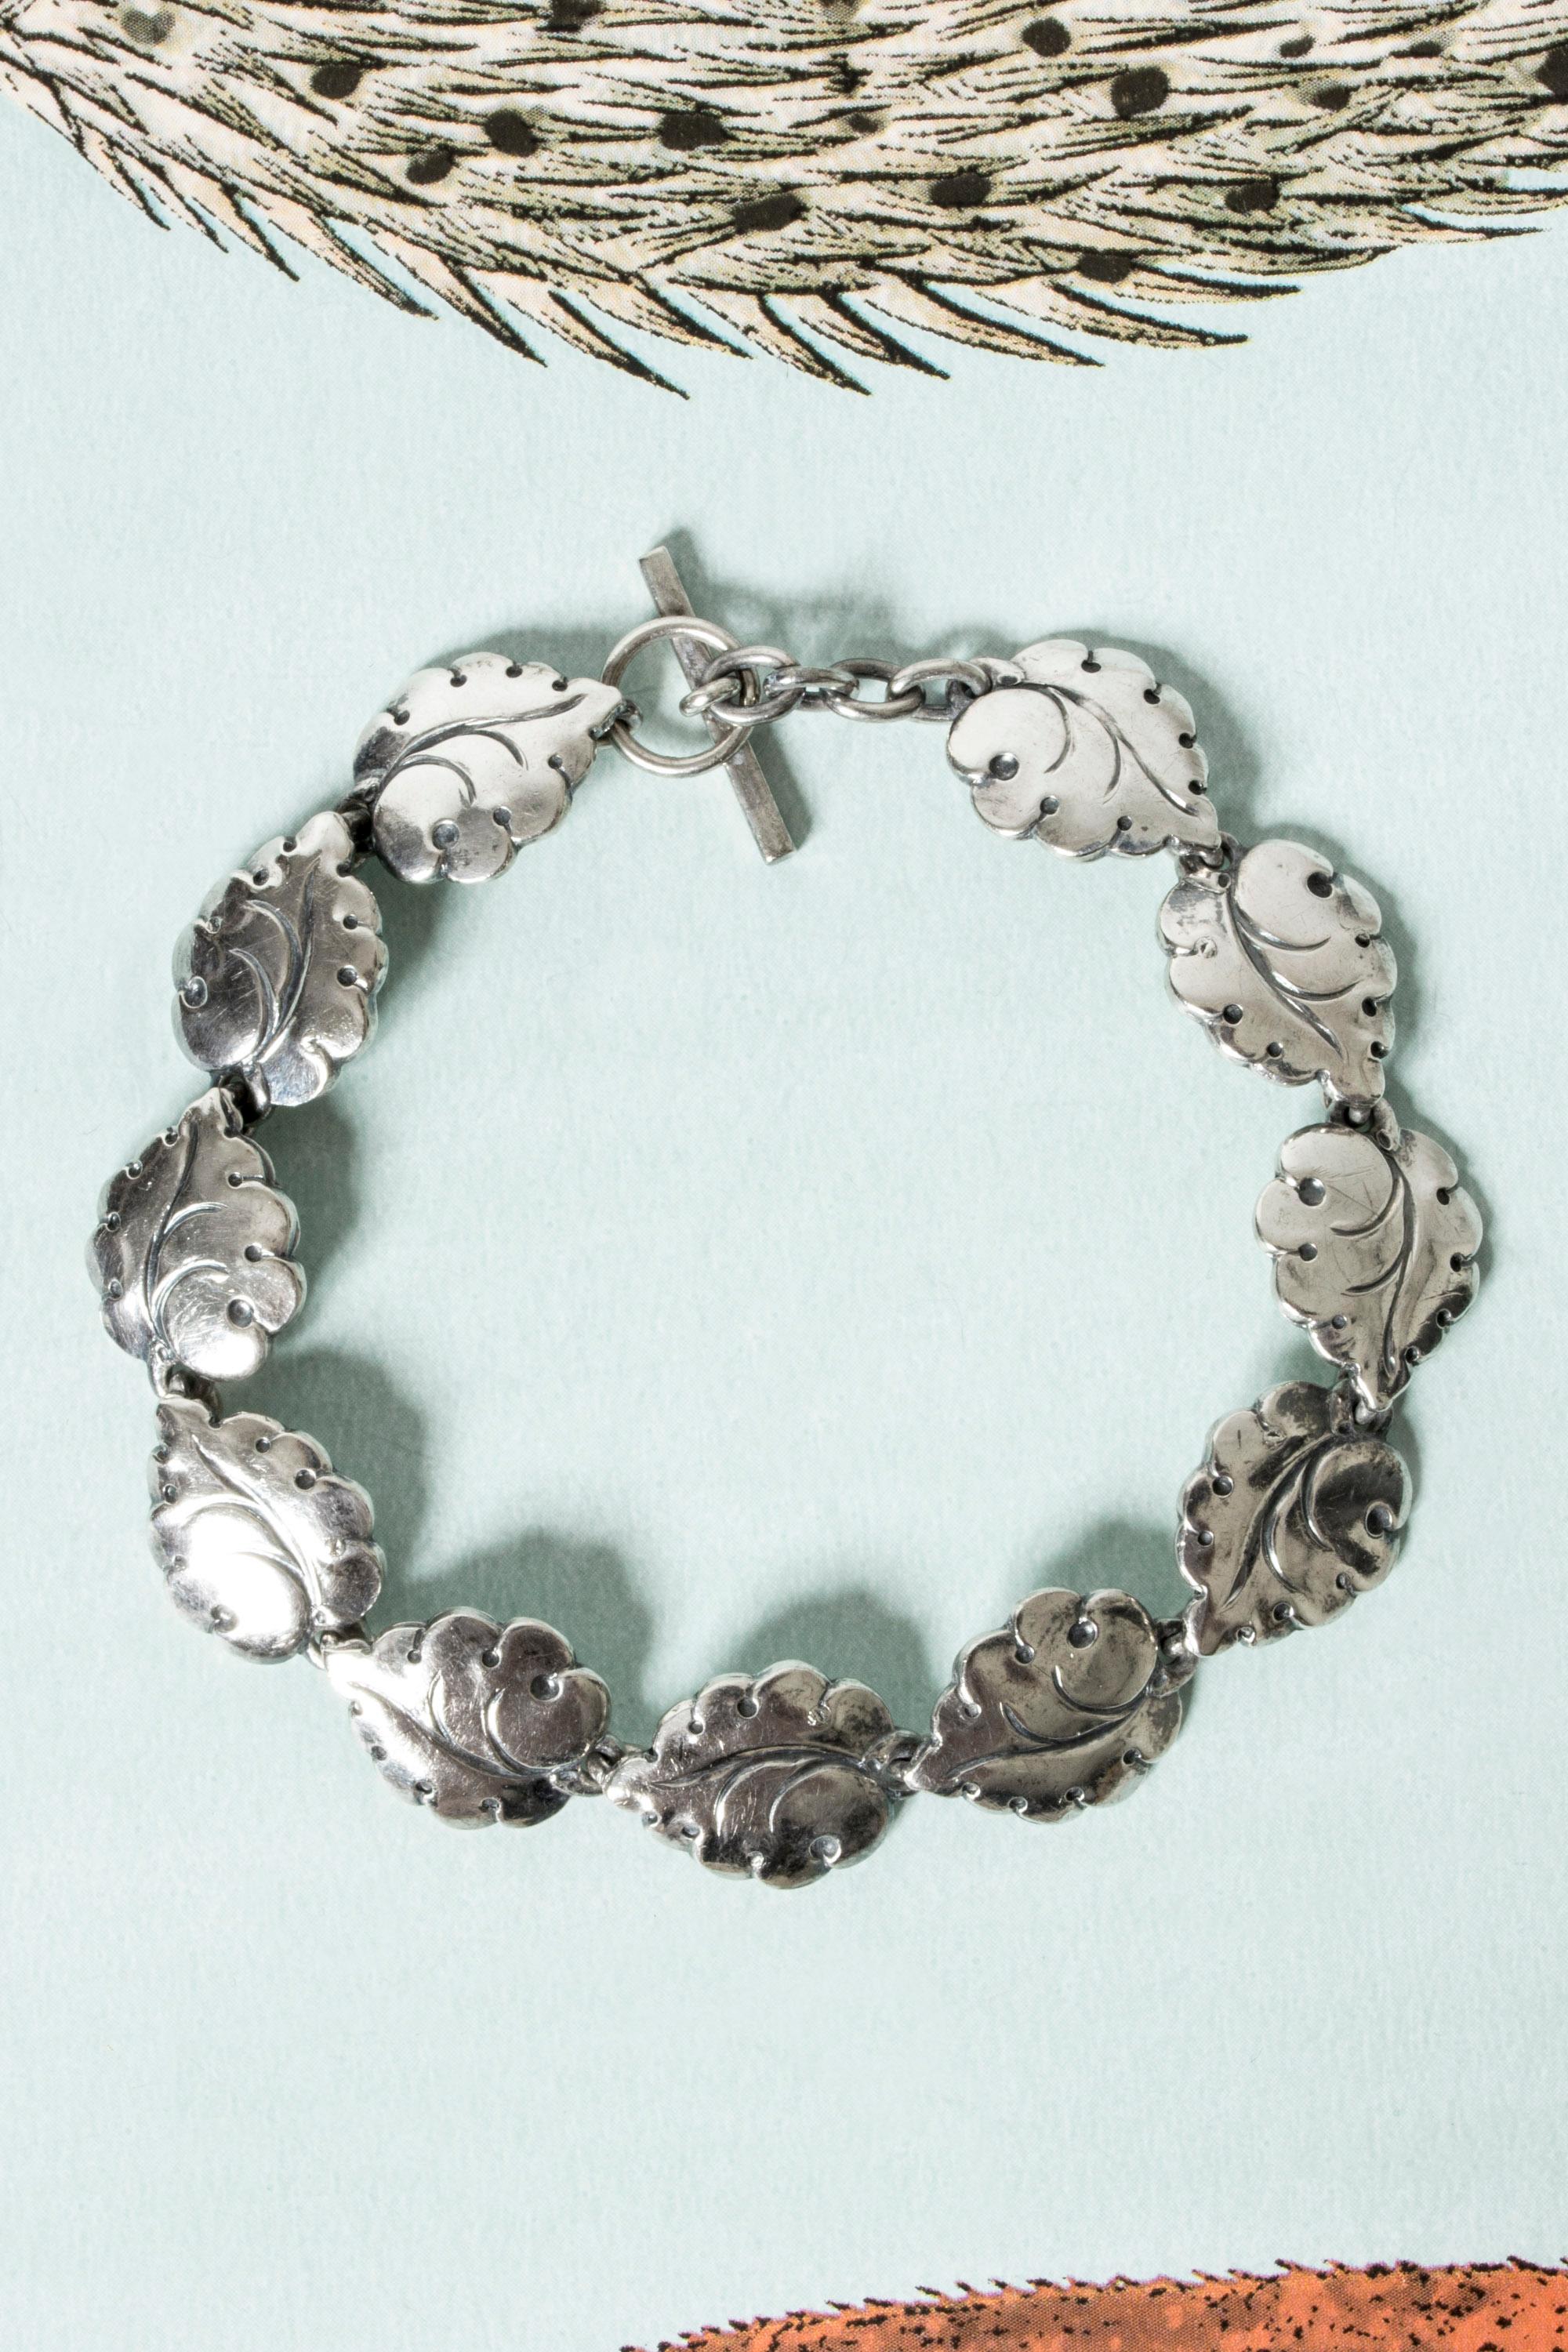 Lovely silver bracelet from Hugo Grün, with links in the form of leaves. Very nice attention to detail, elegant and light around the wrist.